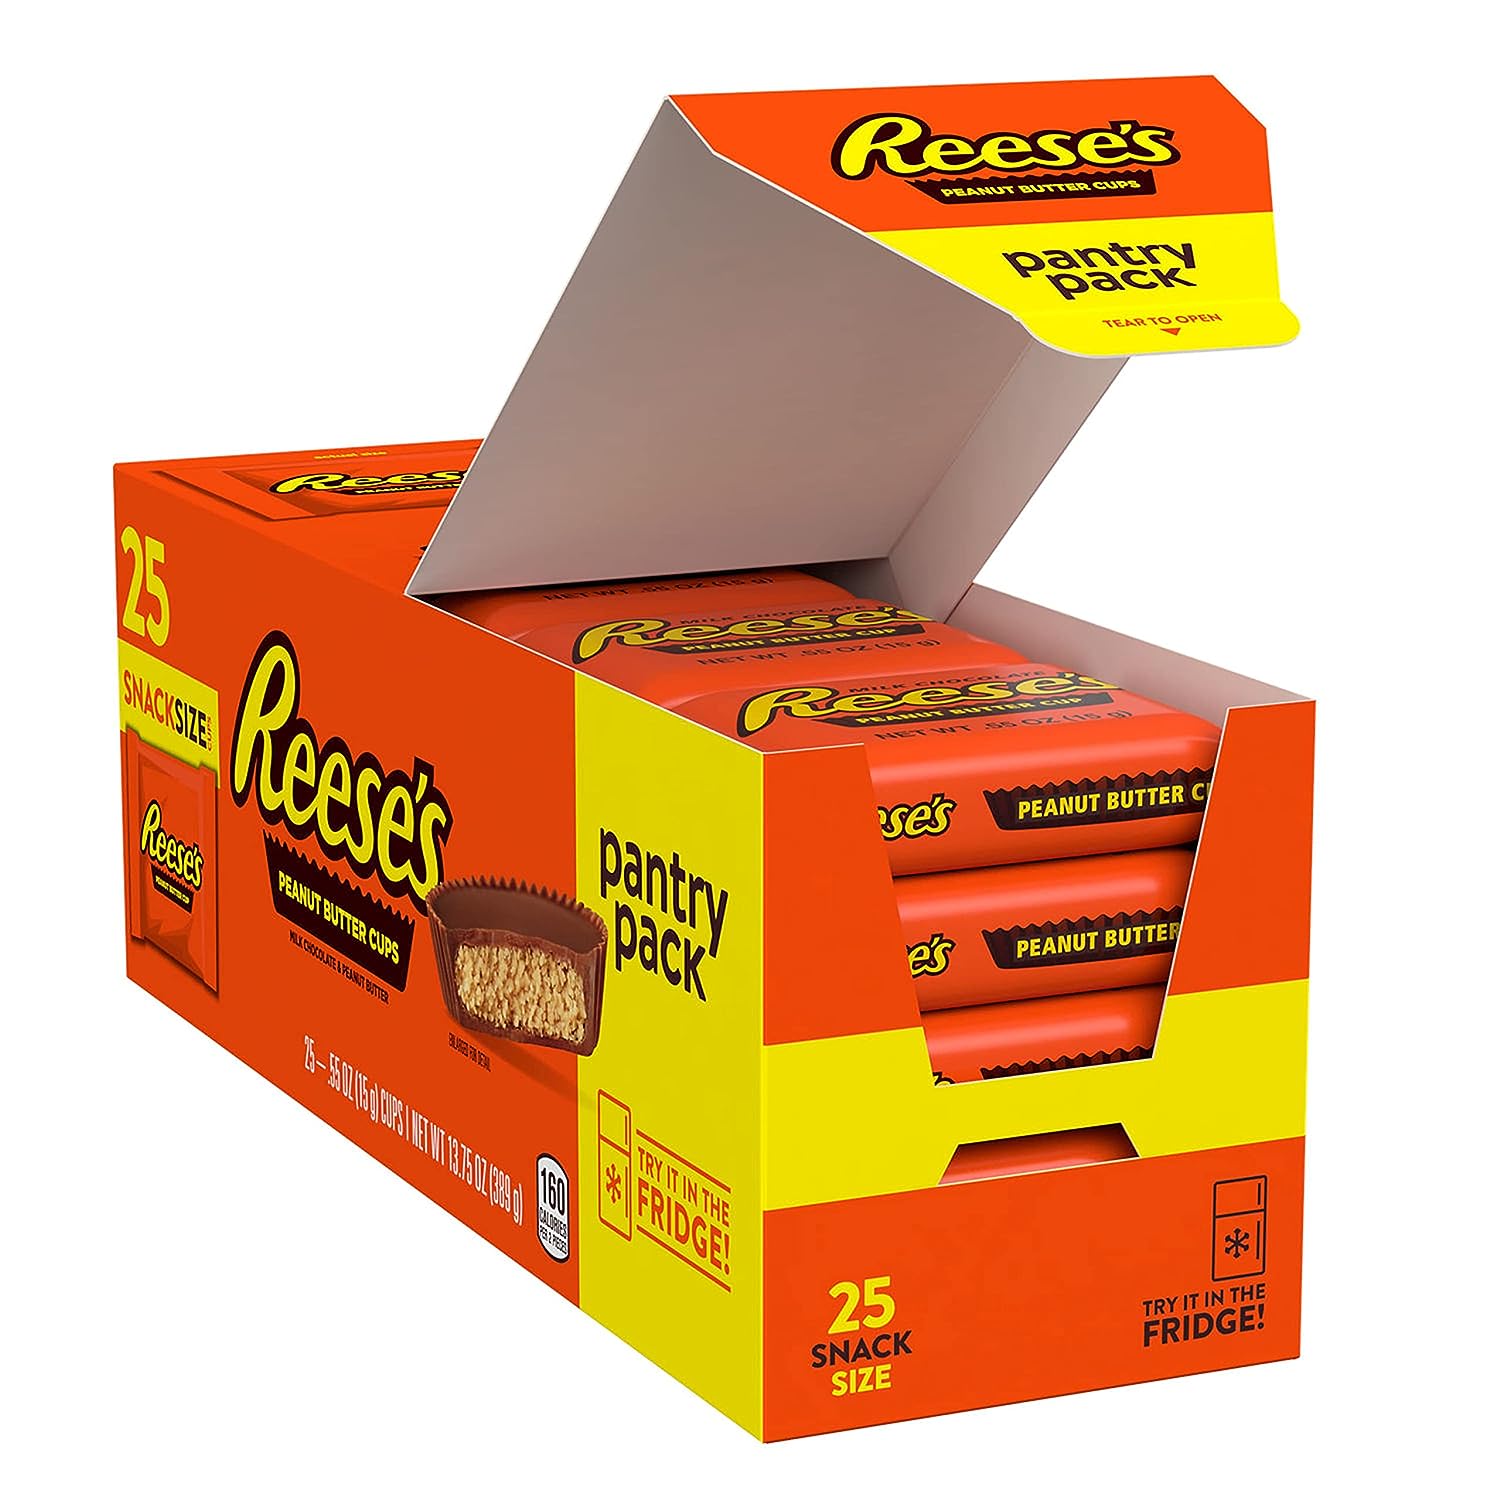 Reese's Milk Chocolate Snack Size Peanut Butter Cups Candy, Pantry Pack 13.75 oz, 25 Pieces - image 1 of 7